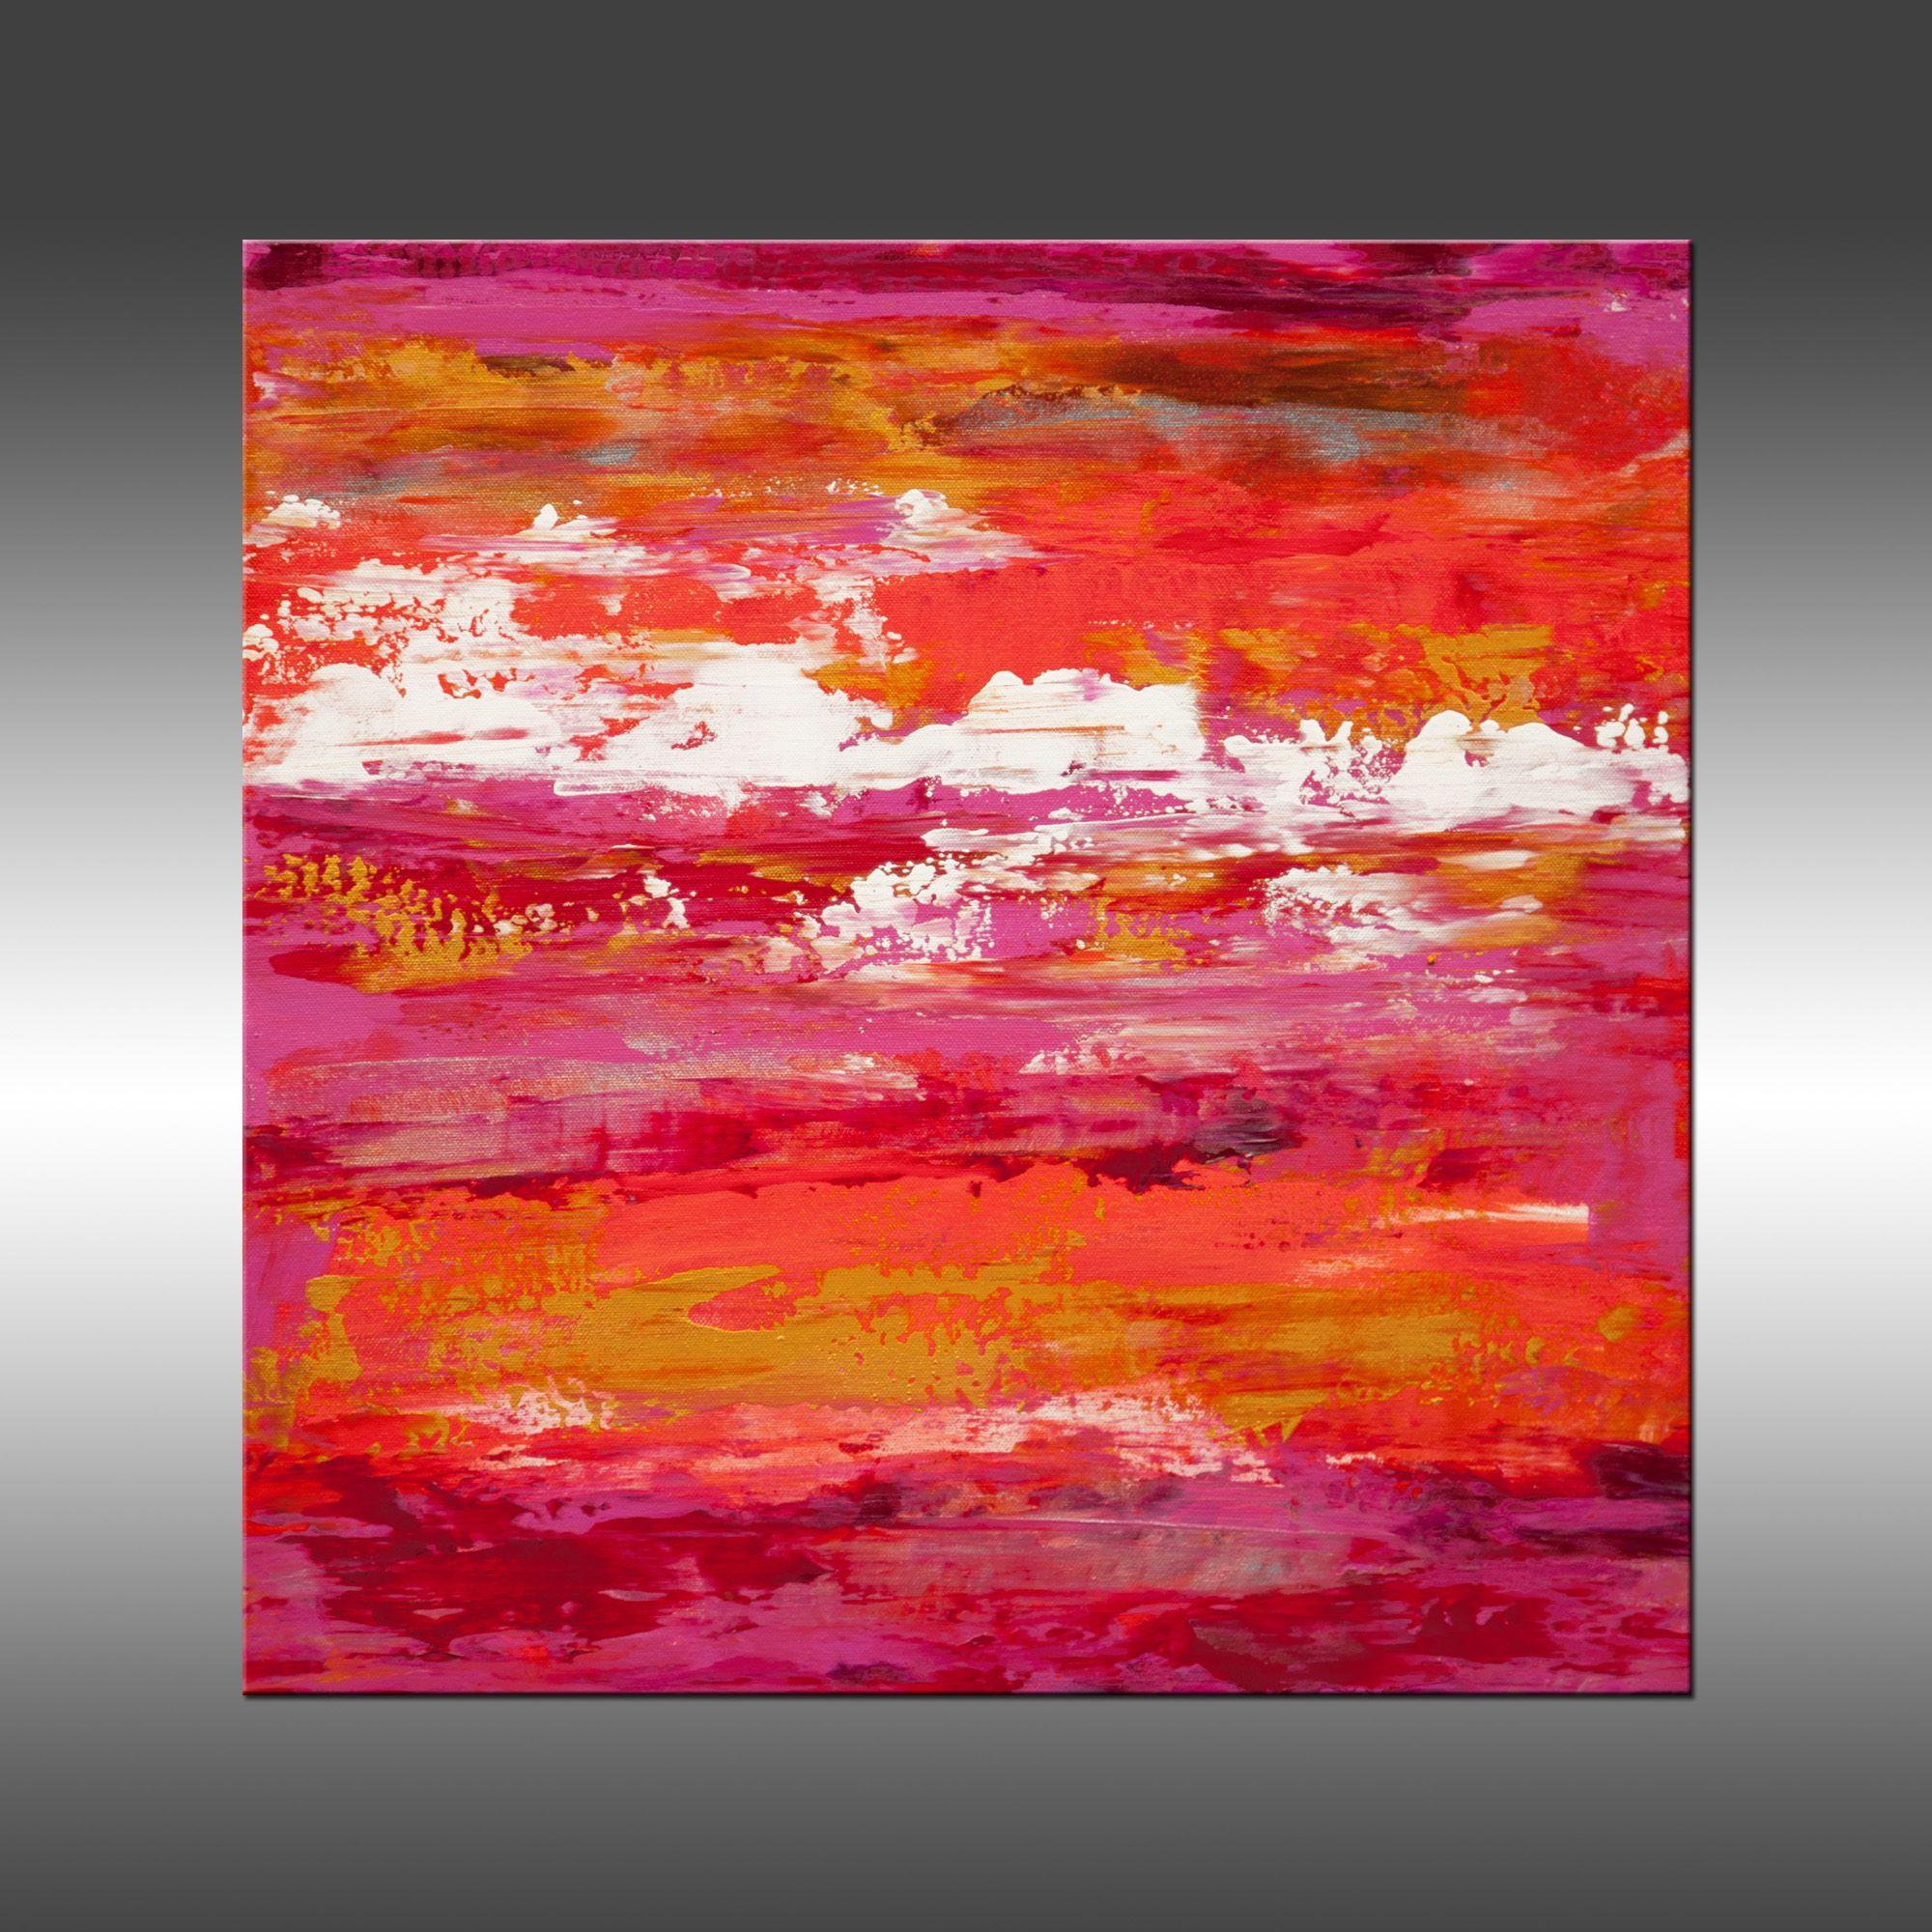 Modern Industrial 15 is an original painting, created with acrylic paint on gallery-wrapped canvas. It has a width of 20 inches and a height of 20 inches with a depth of 1 inch (20x20x1).     The colors used in the painting are pink, white, fuchsia,